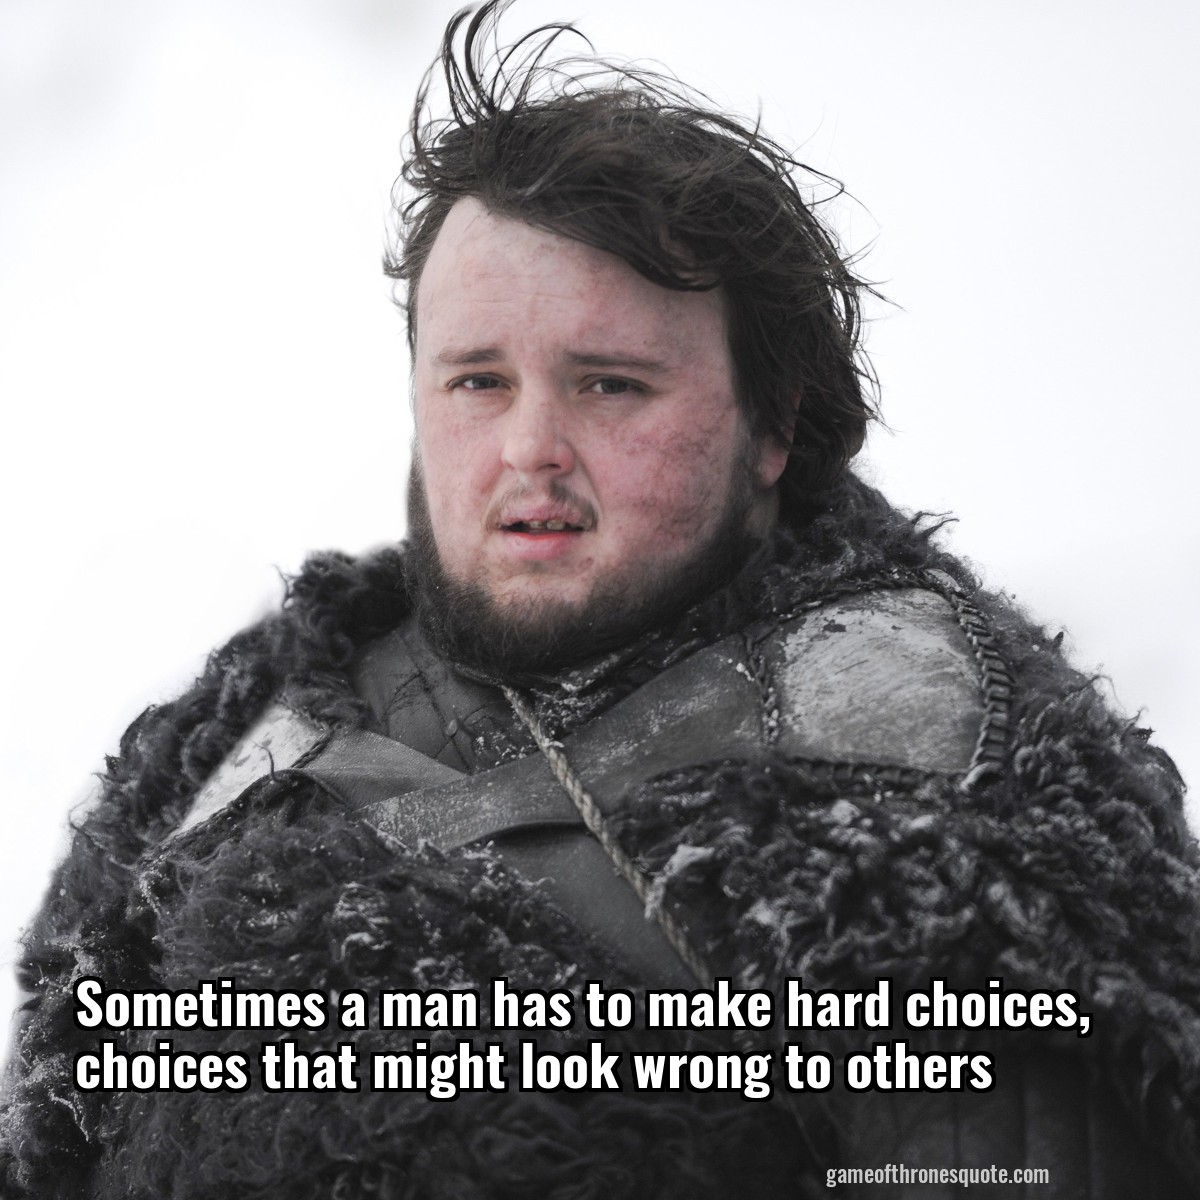 Sometimes a man has to make hard choices, choices that might look wrong to others